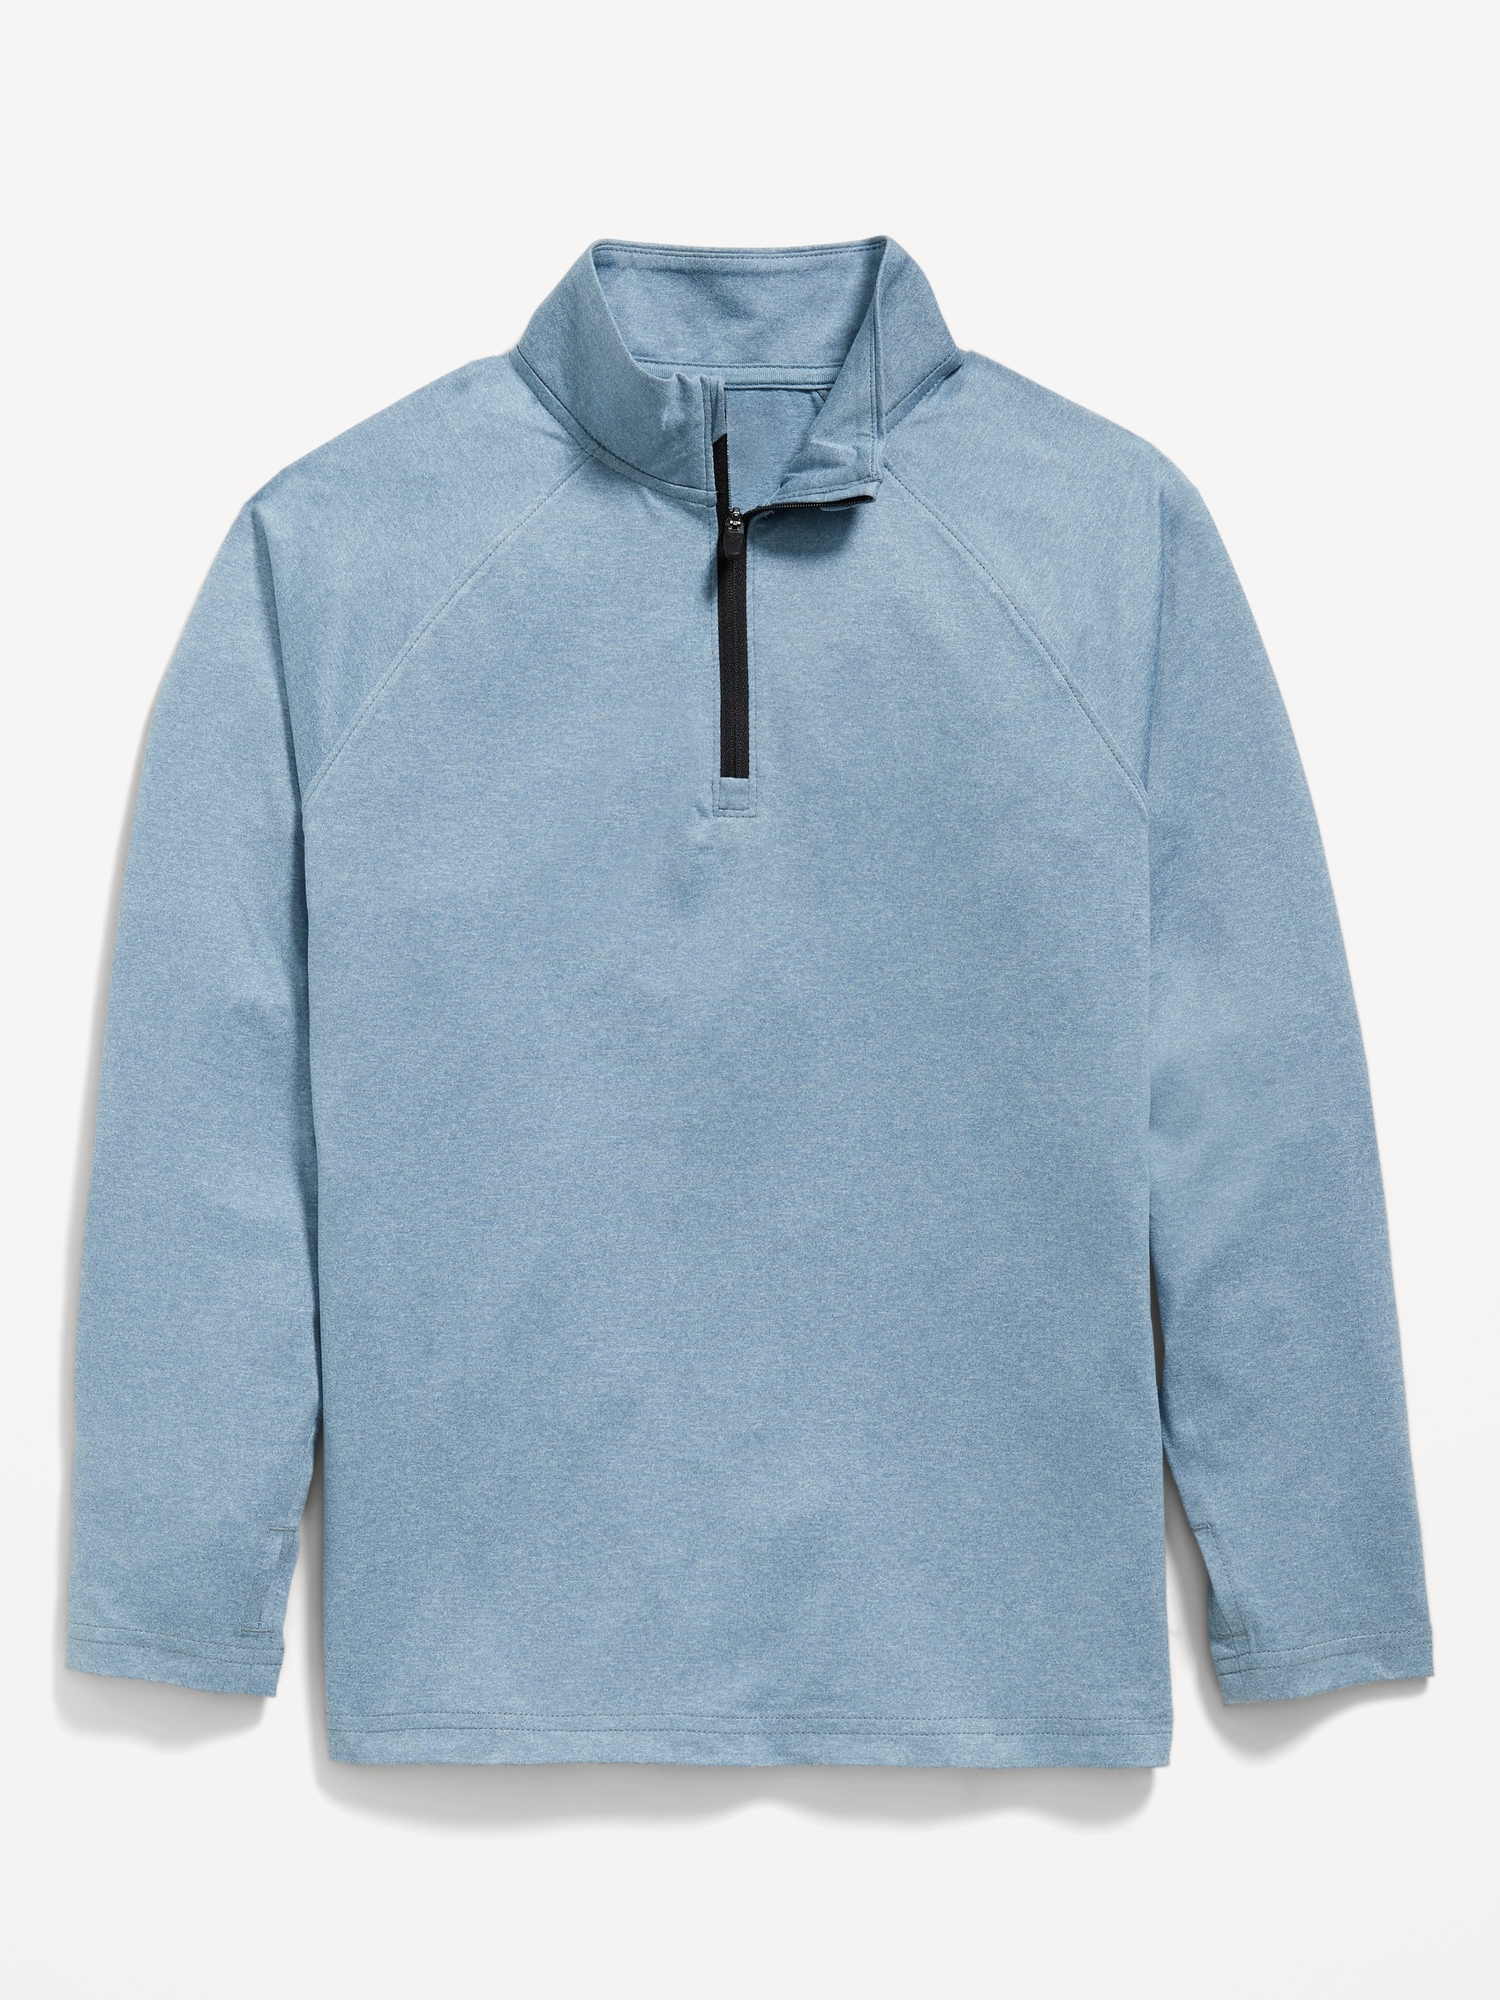 Cloud 94 Soft Go-Dry Cool 1/4-Zip Performance Top for Boys